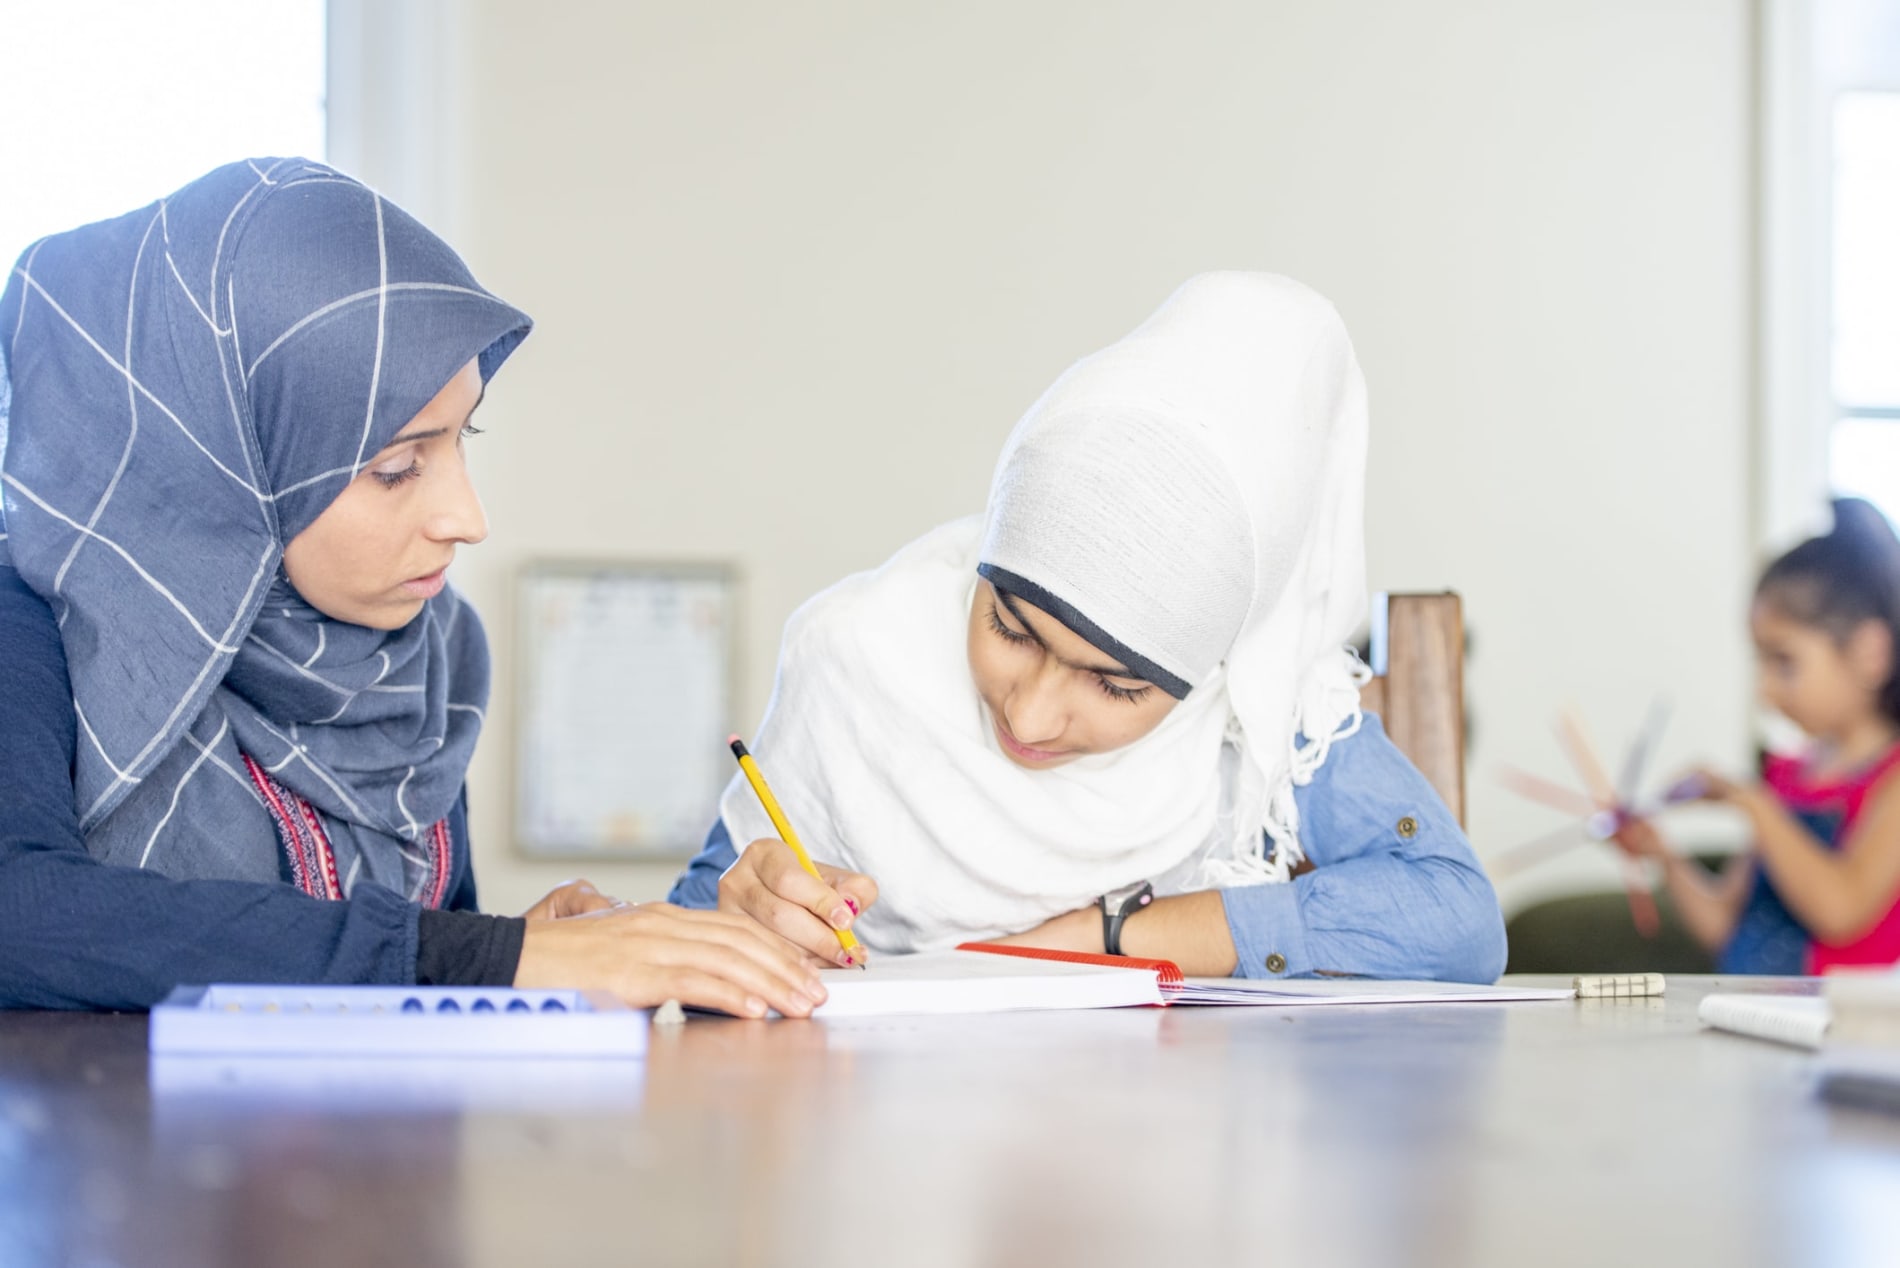 Teacher helping a girl with writing at a desk, both wearing hijabs 